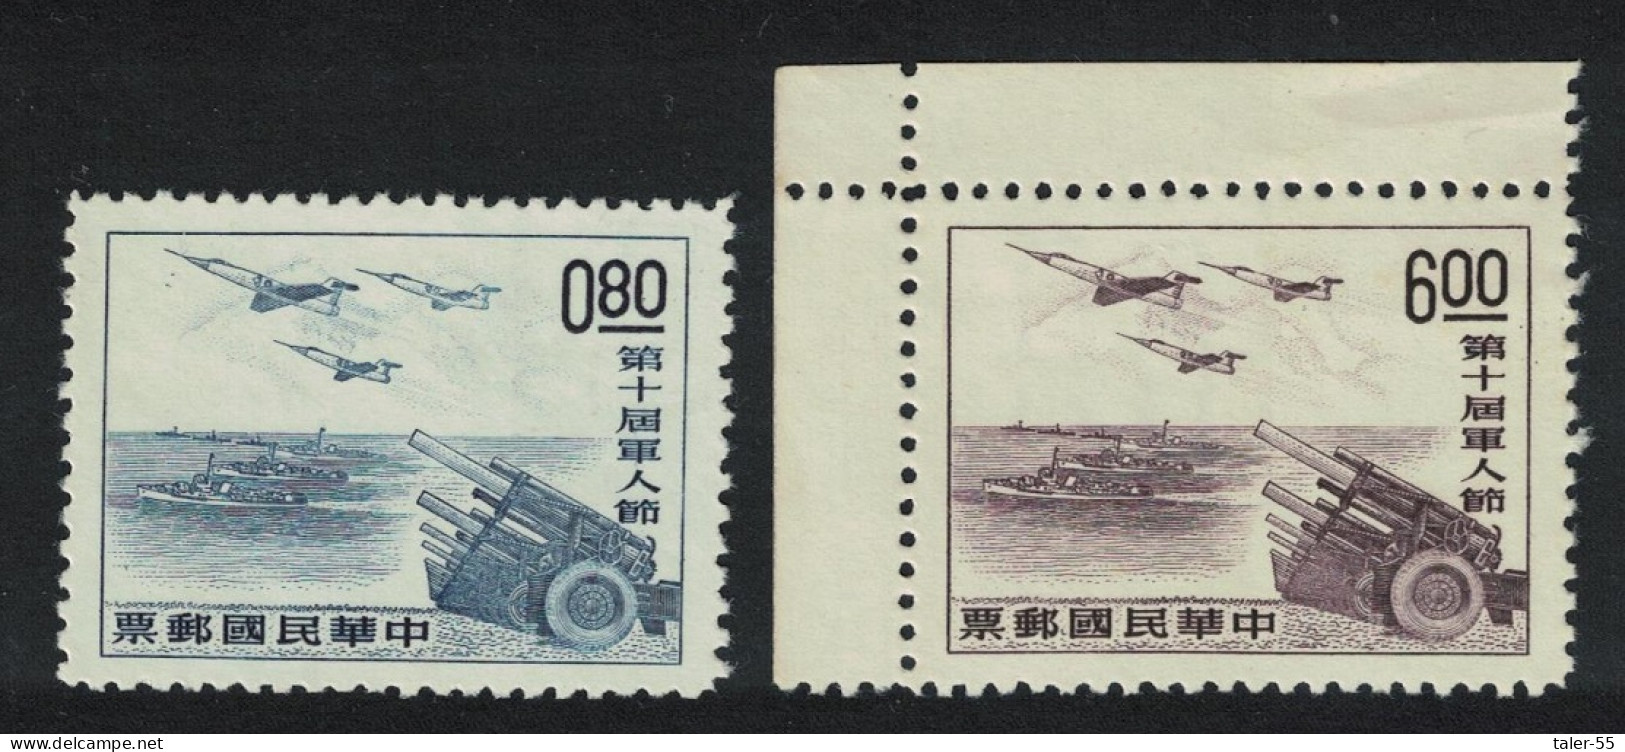 Taiwan Armed Forces Day 2v 1964 MNH SG#518-519 MI#540-541 - Ungebraucht